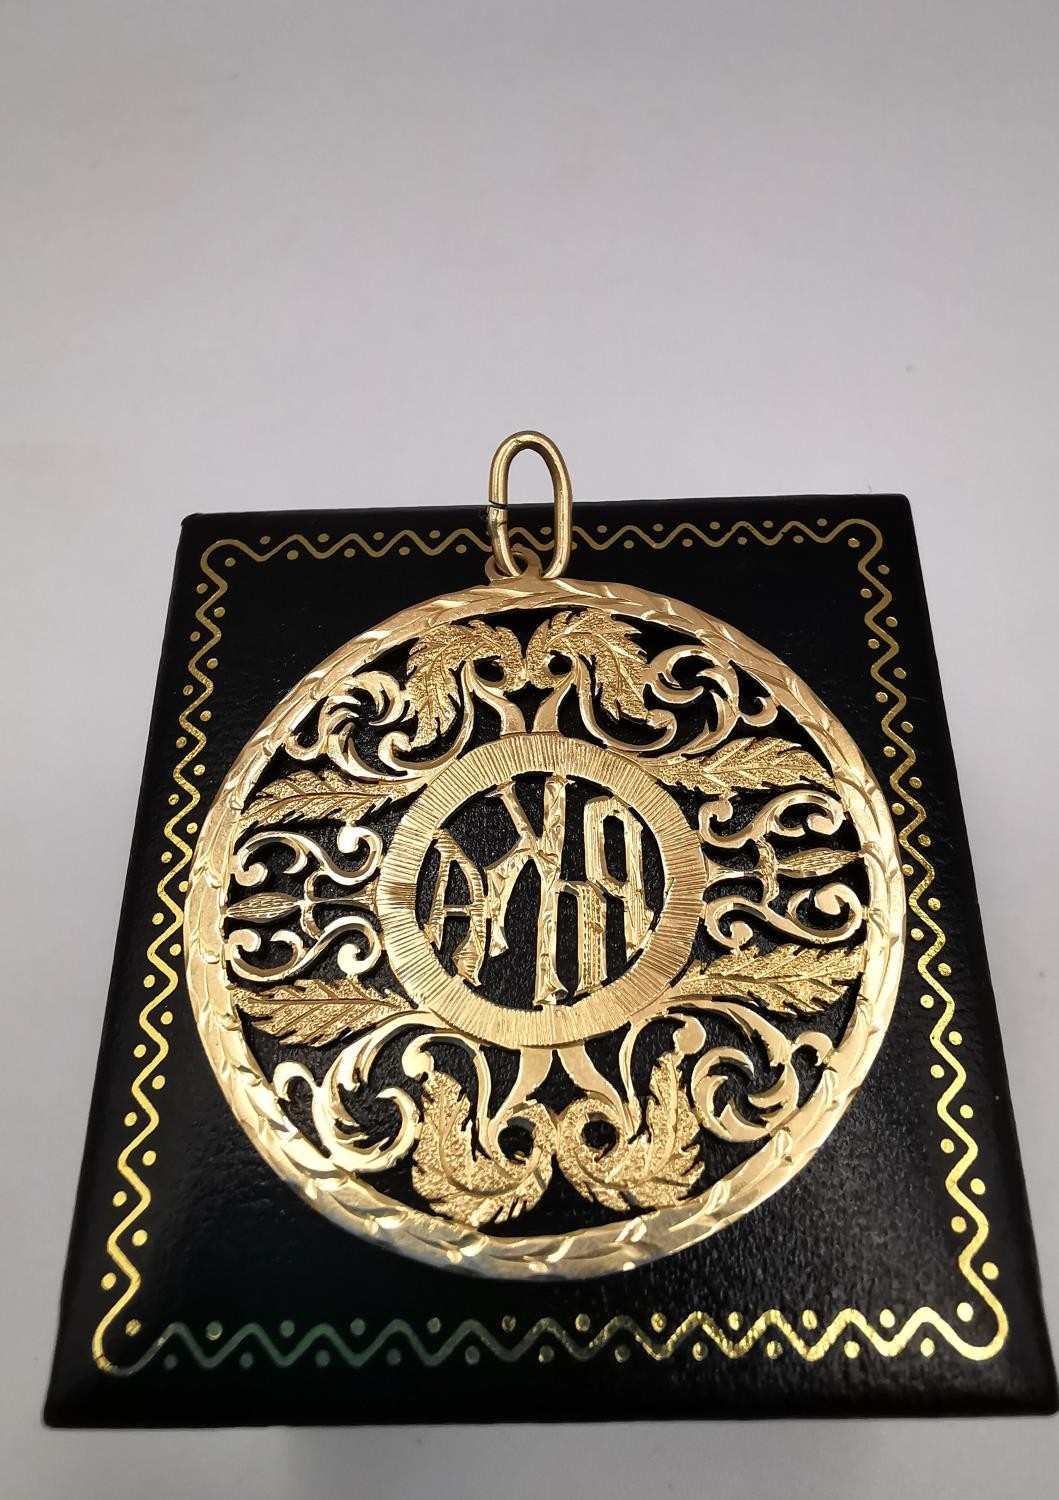 A gold plated pierced mongram pendant with acanthus leaf detailing. Diameter 4cm. Weight 5.06g - Image 4 of 5